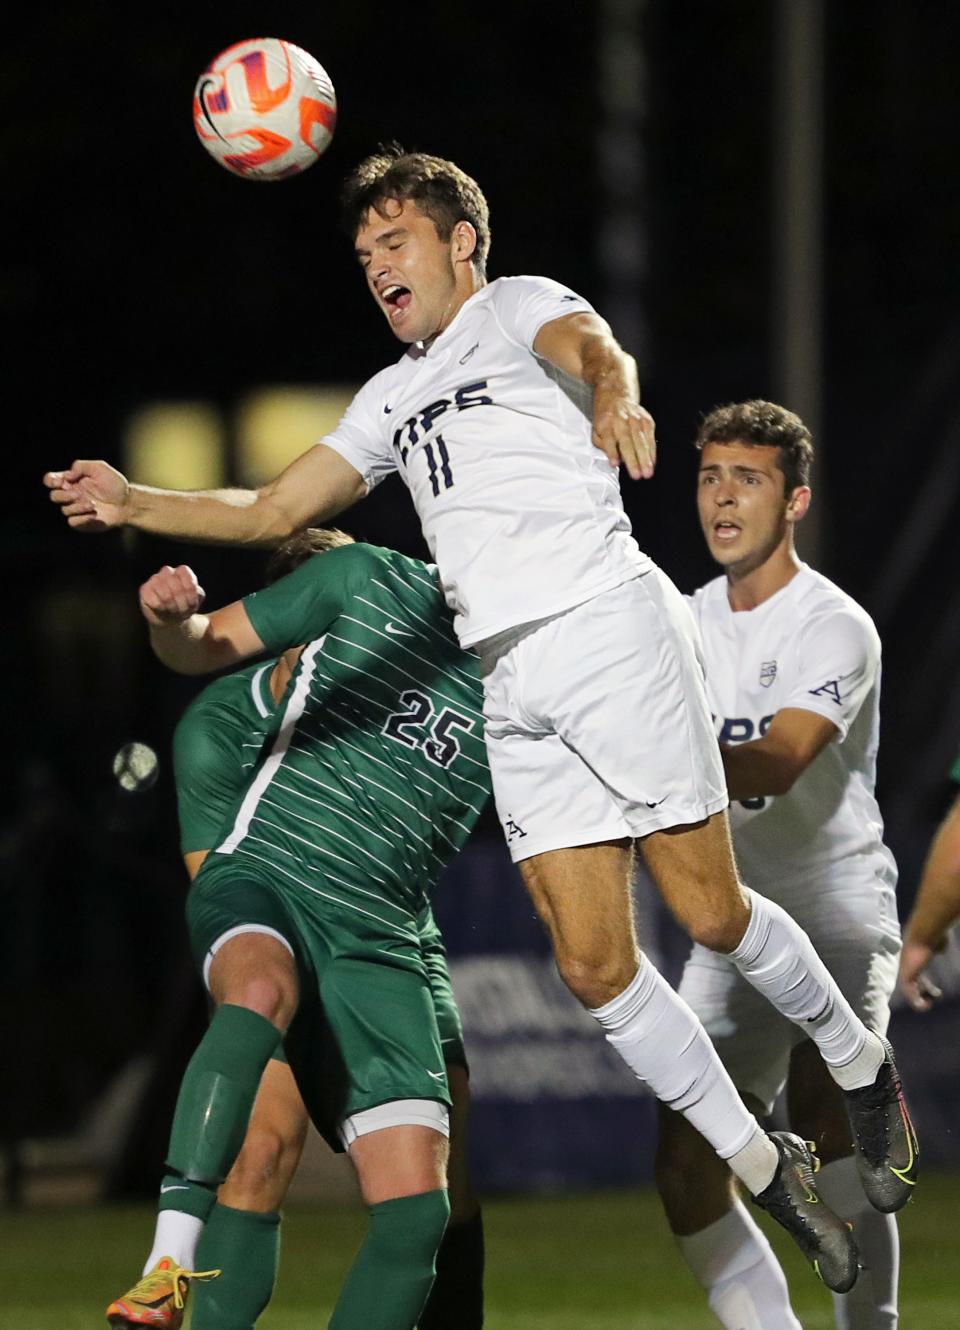 Akron defender Will Jackson (11) heads a corner kick into the goal over Cleveland St. midfielder Josh Davis (25) to put the Zips on the board during the first half of an NCAA college soccer game, Tuesday, Oct. 25, 2022, in Akron, Ohio.